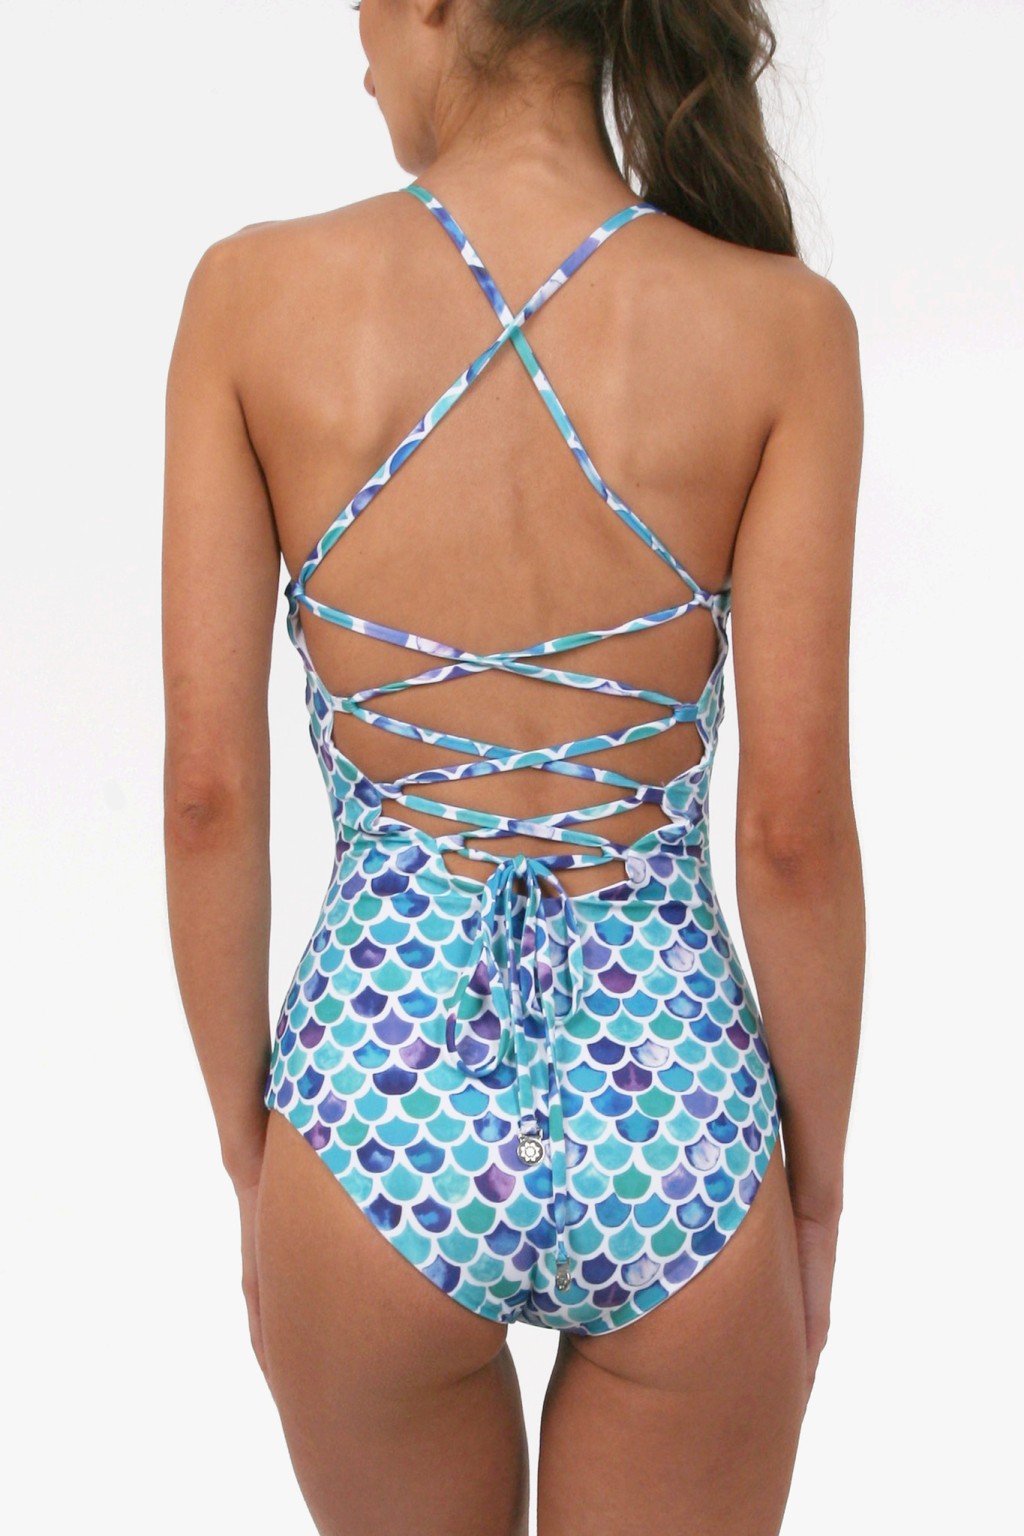 Make a Splash: Choose Eco-Friendly Swimwear for a Healthier You and the Planet